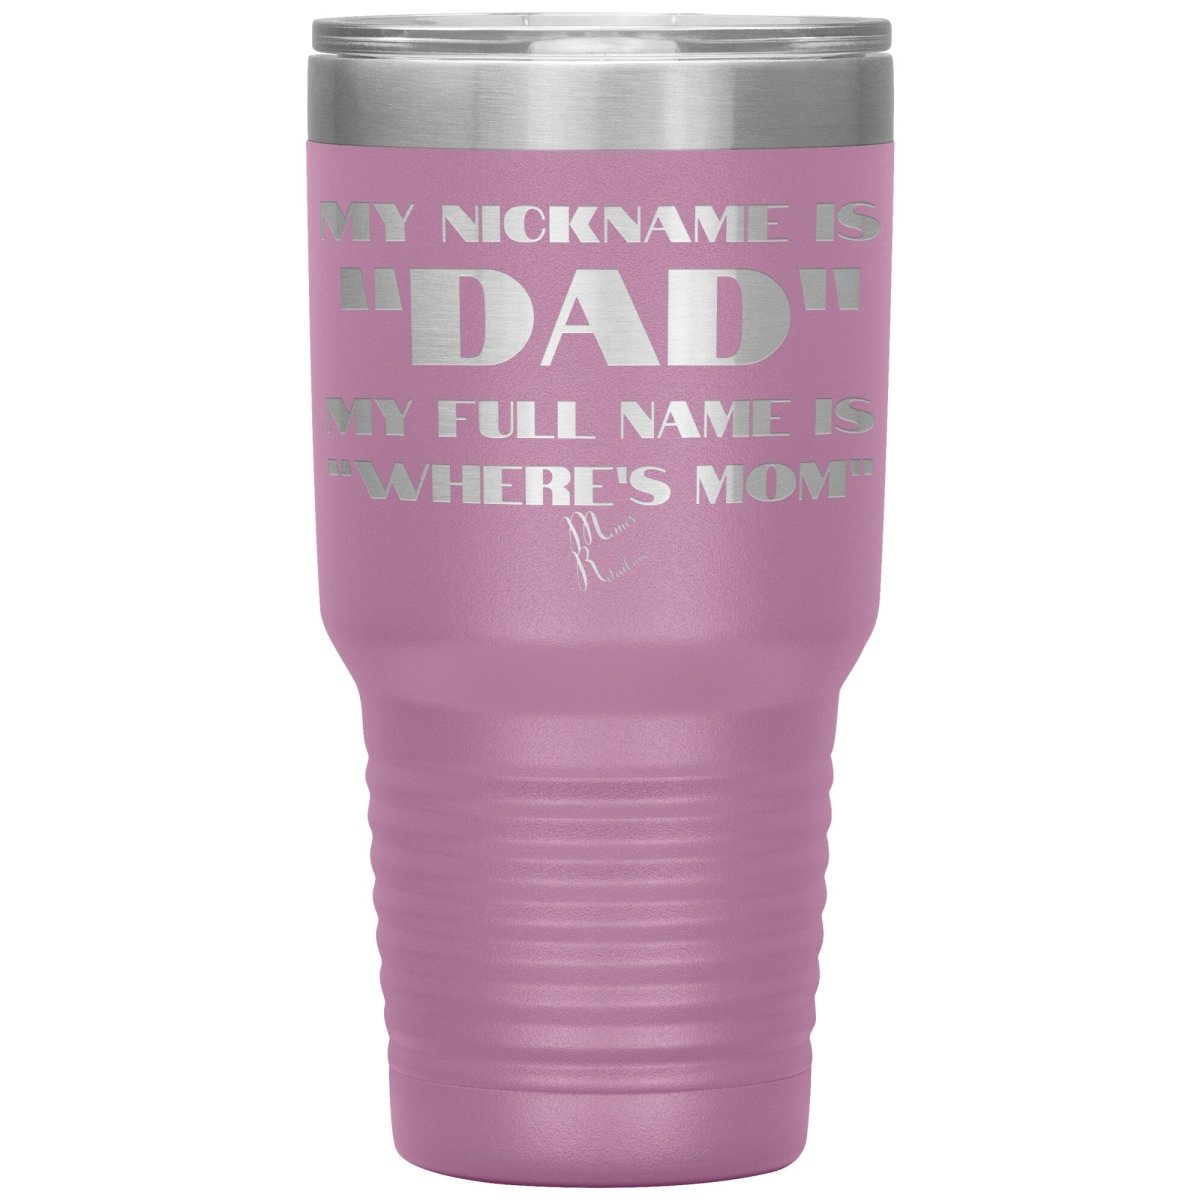 My Nickname is "Dad", My Full Name is "Where's Mom" Tumblers, 30oz Insulated Tumbler / Light Purple - MemesRetail.com